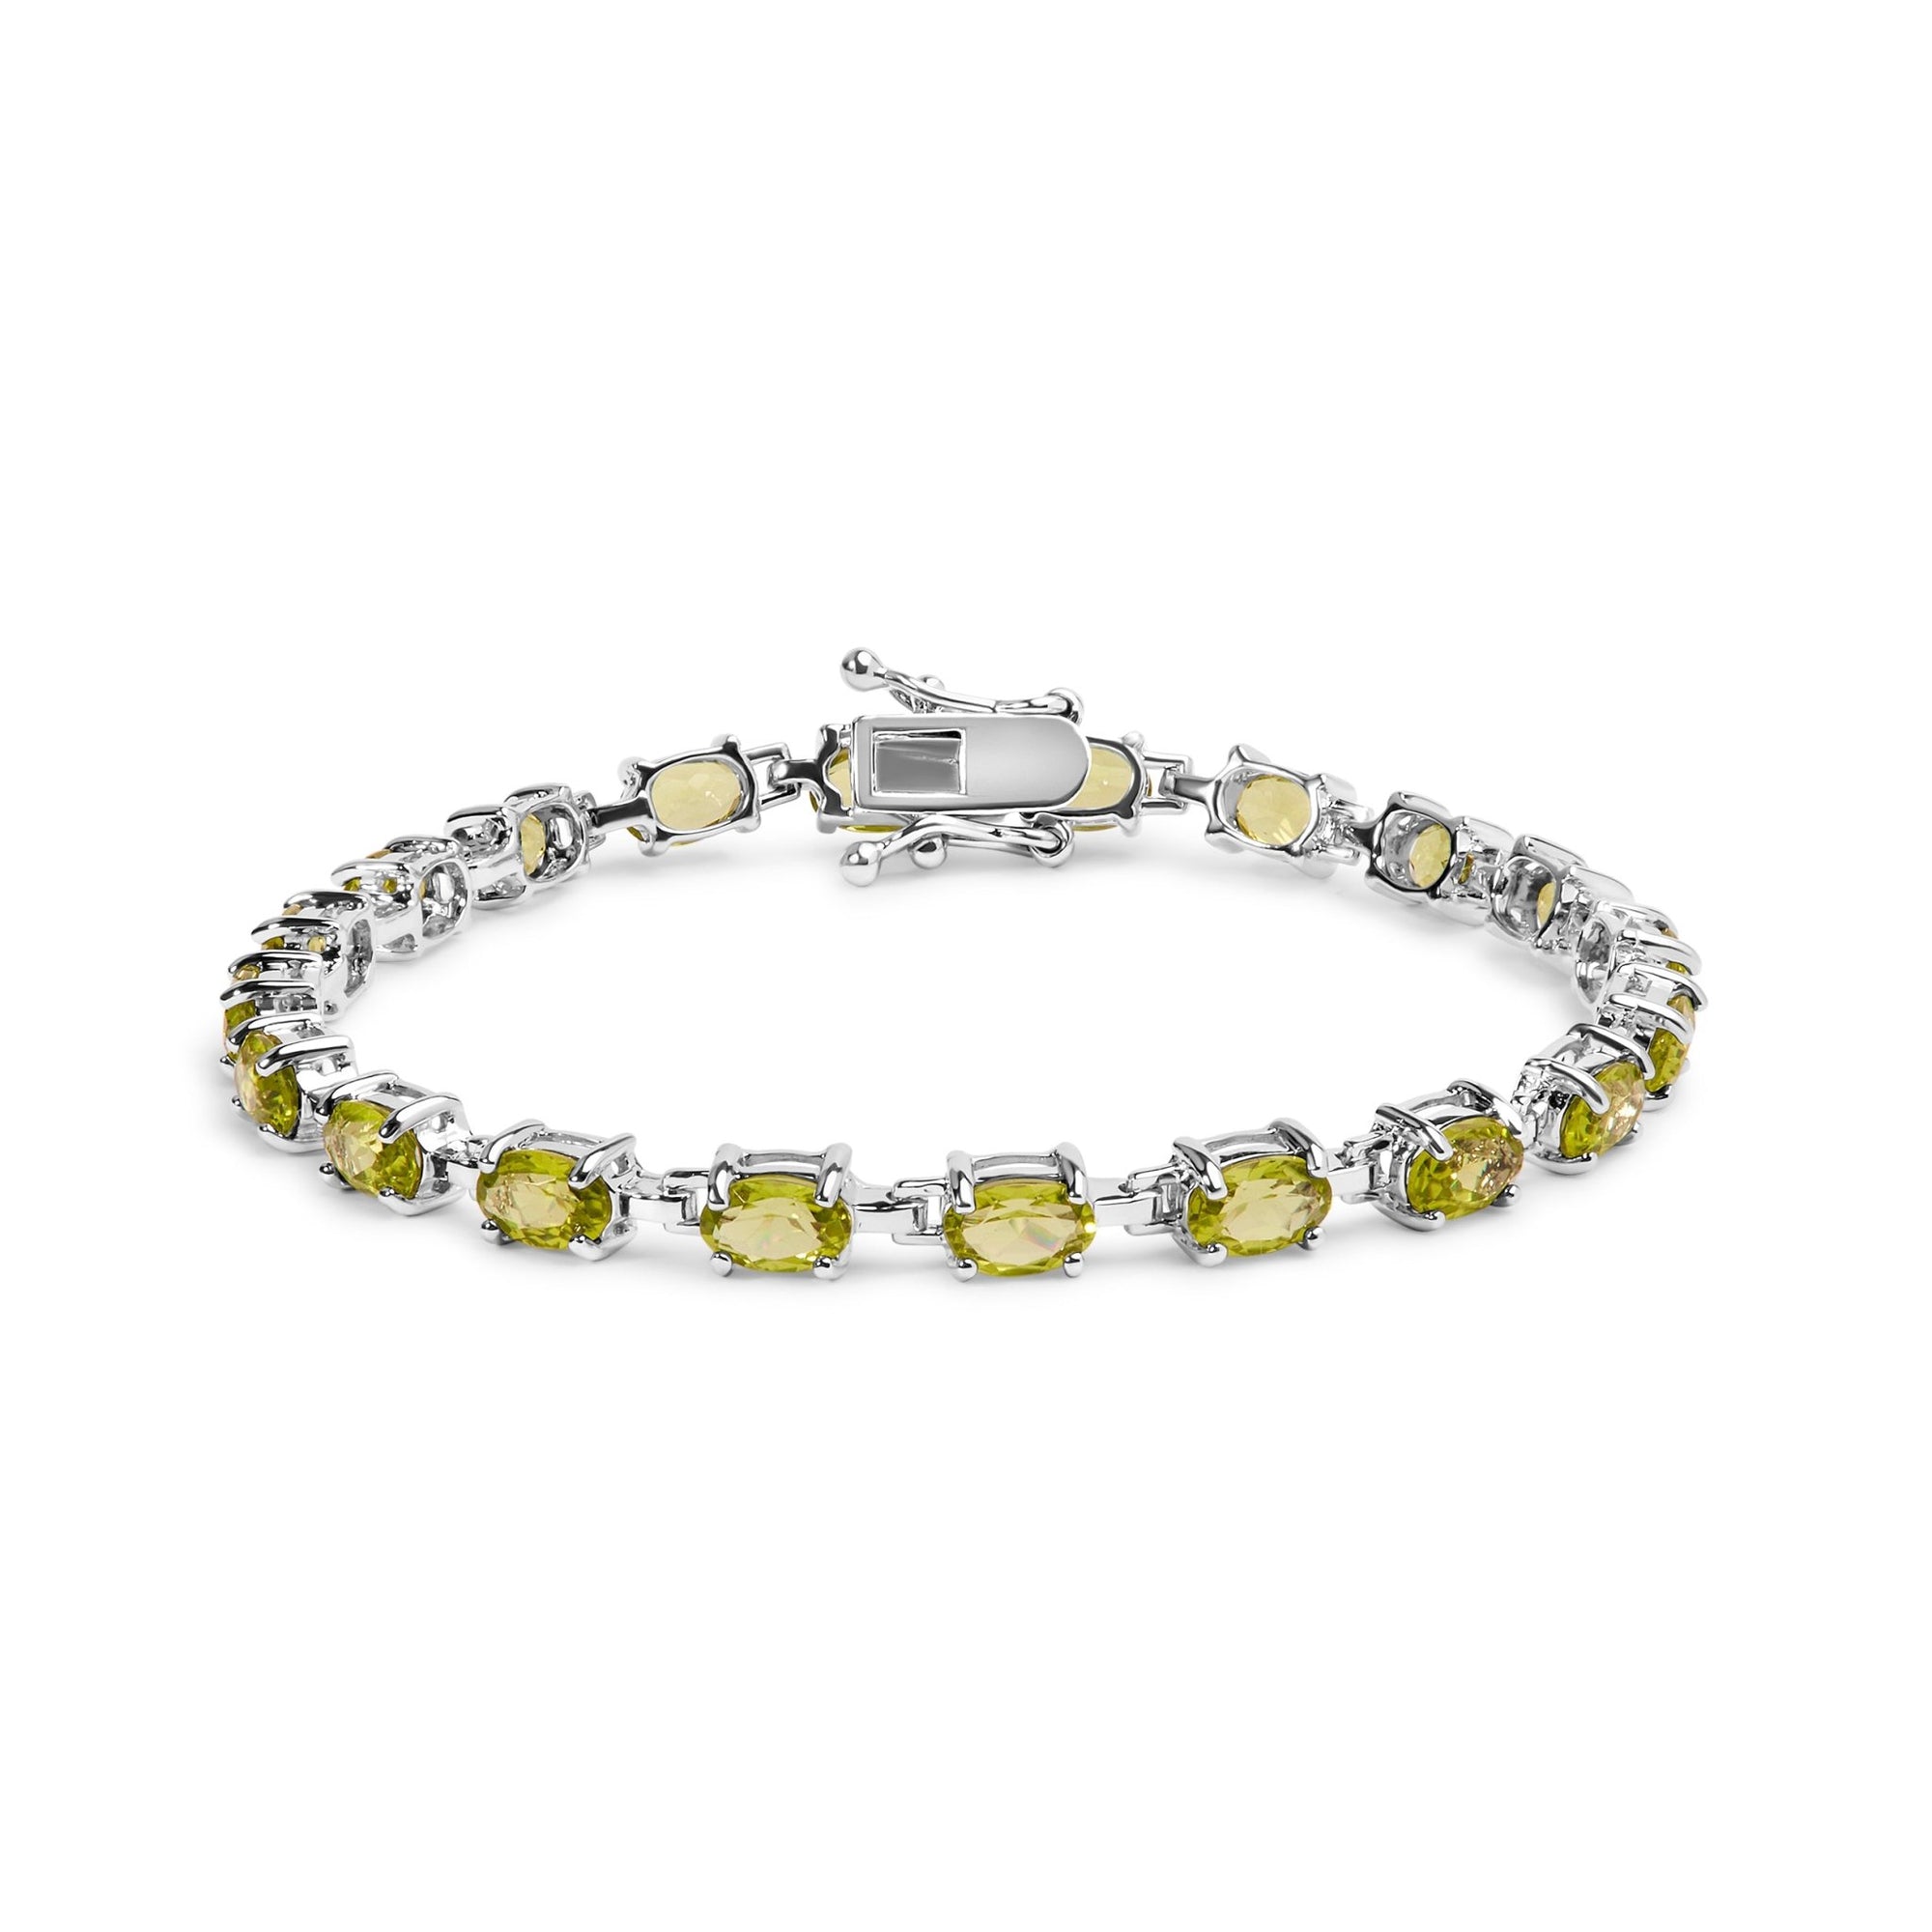 .925 Sterling Silver 10.0 Cttw Oval Shaped Created Green Peridot Link Bracelet - 7 inches" - LinkagejewelrydesignLinkagejewelrydesign